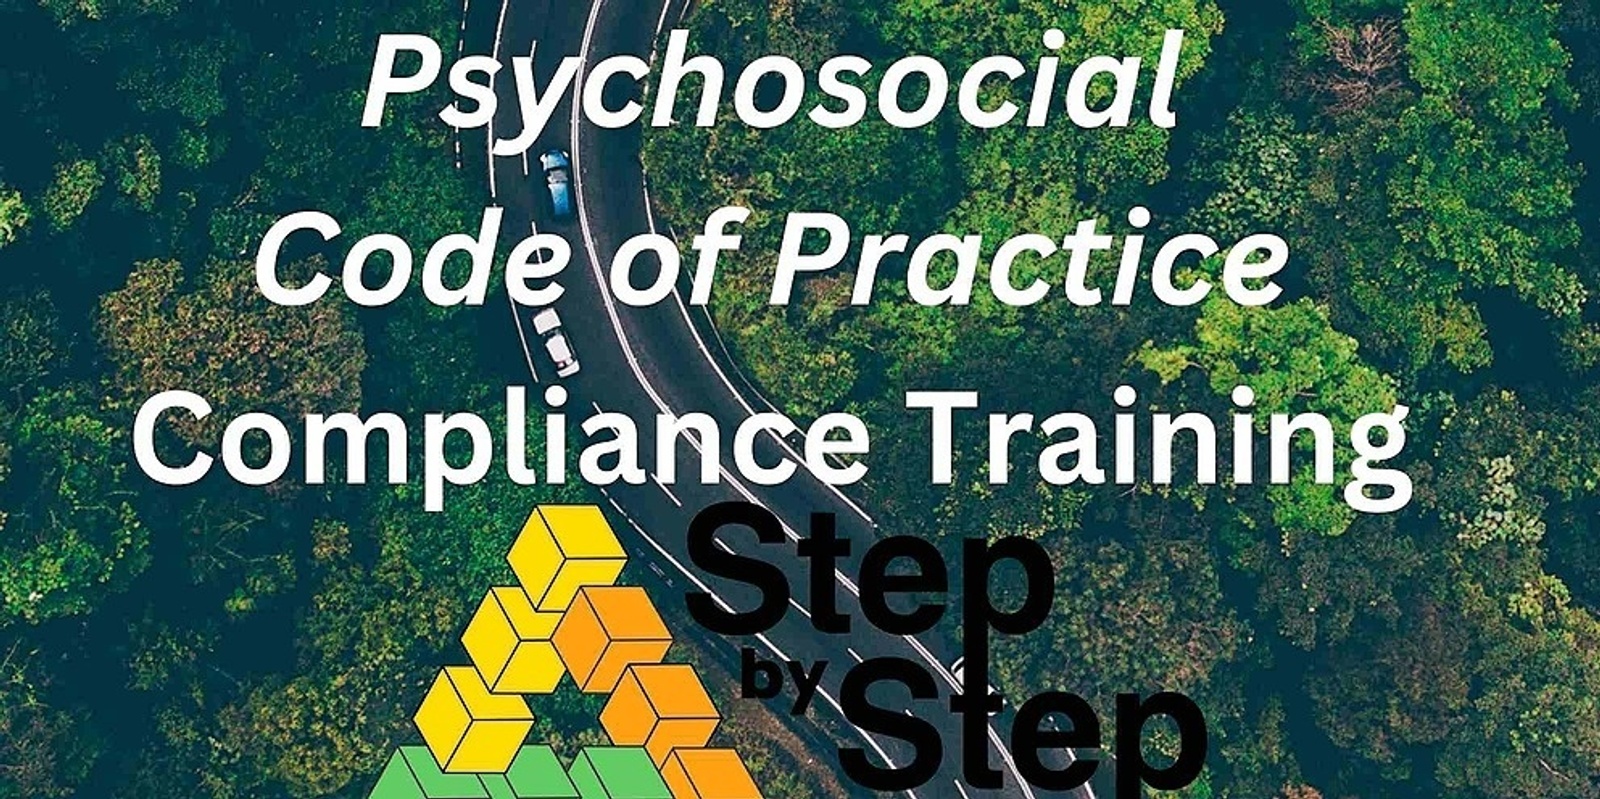 Psychosocial Code of Practice - Compliance Training Toowoomba AM